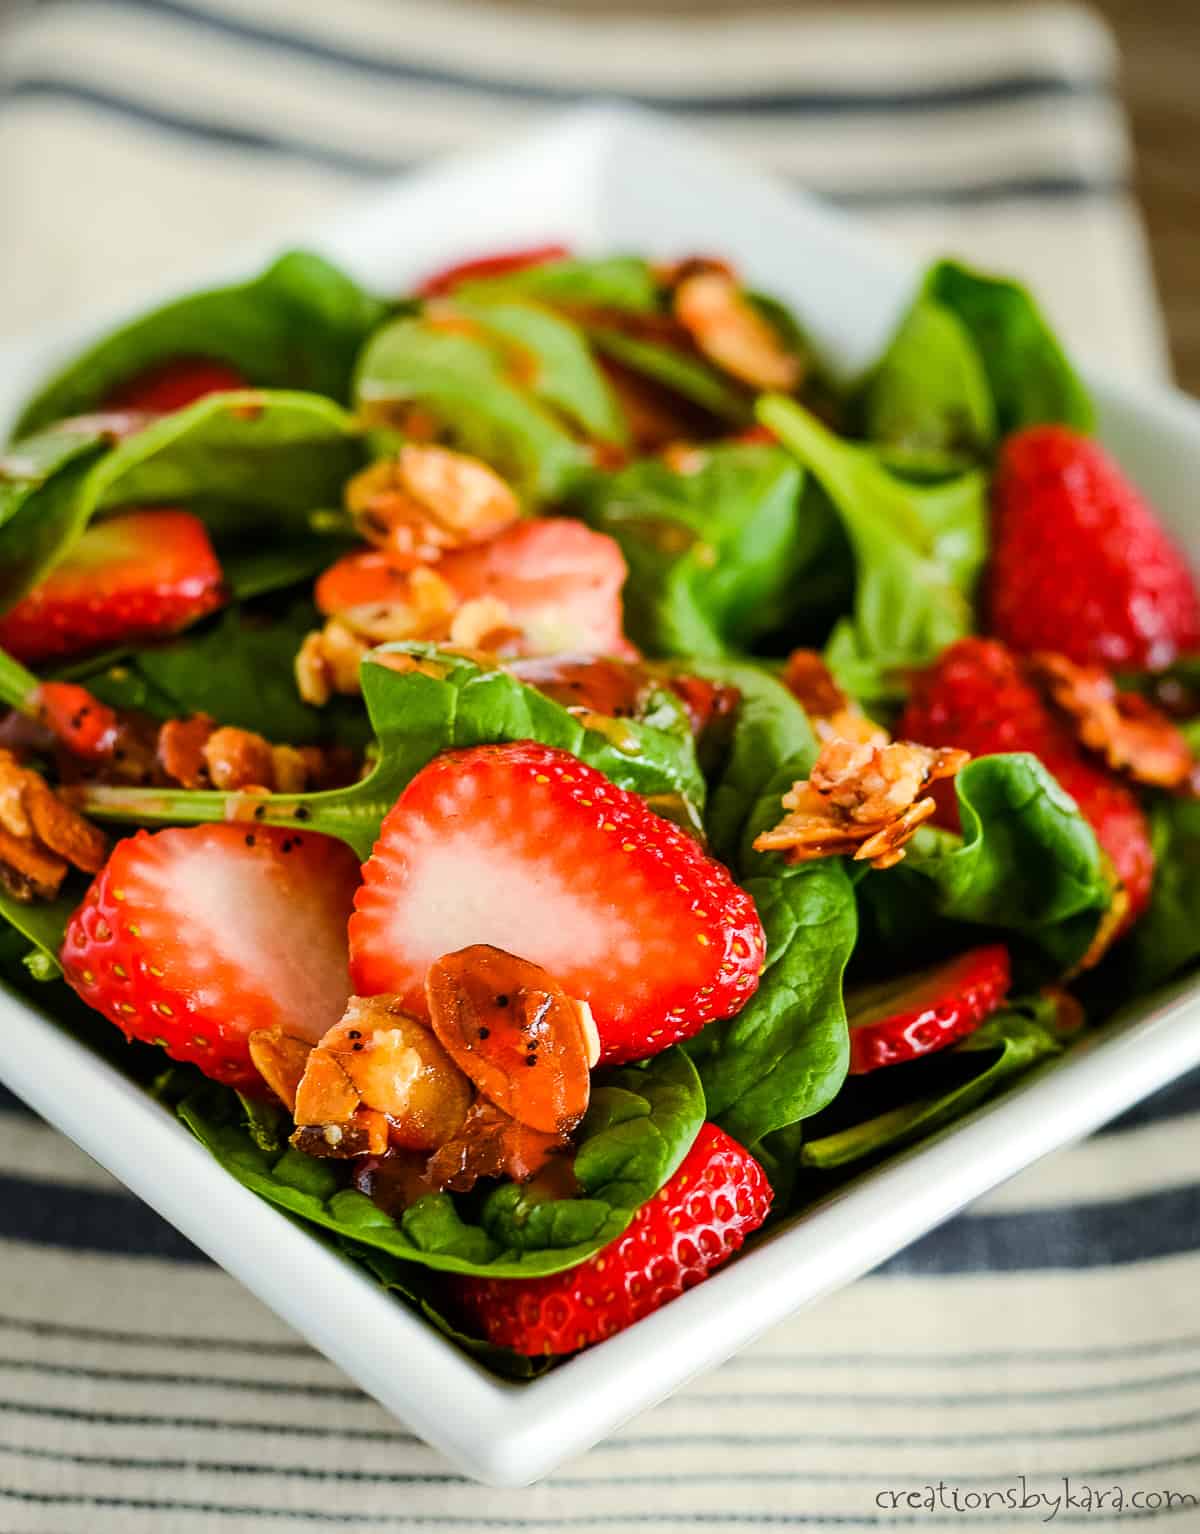 spinach strawberry salad with caramelized almonds and strawberry salad dressing